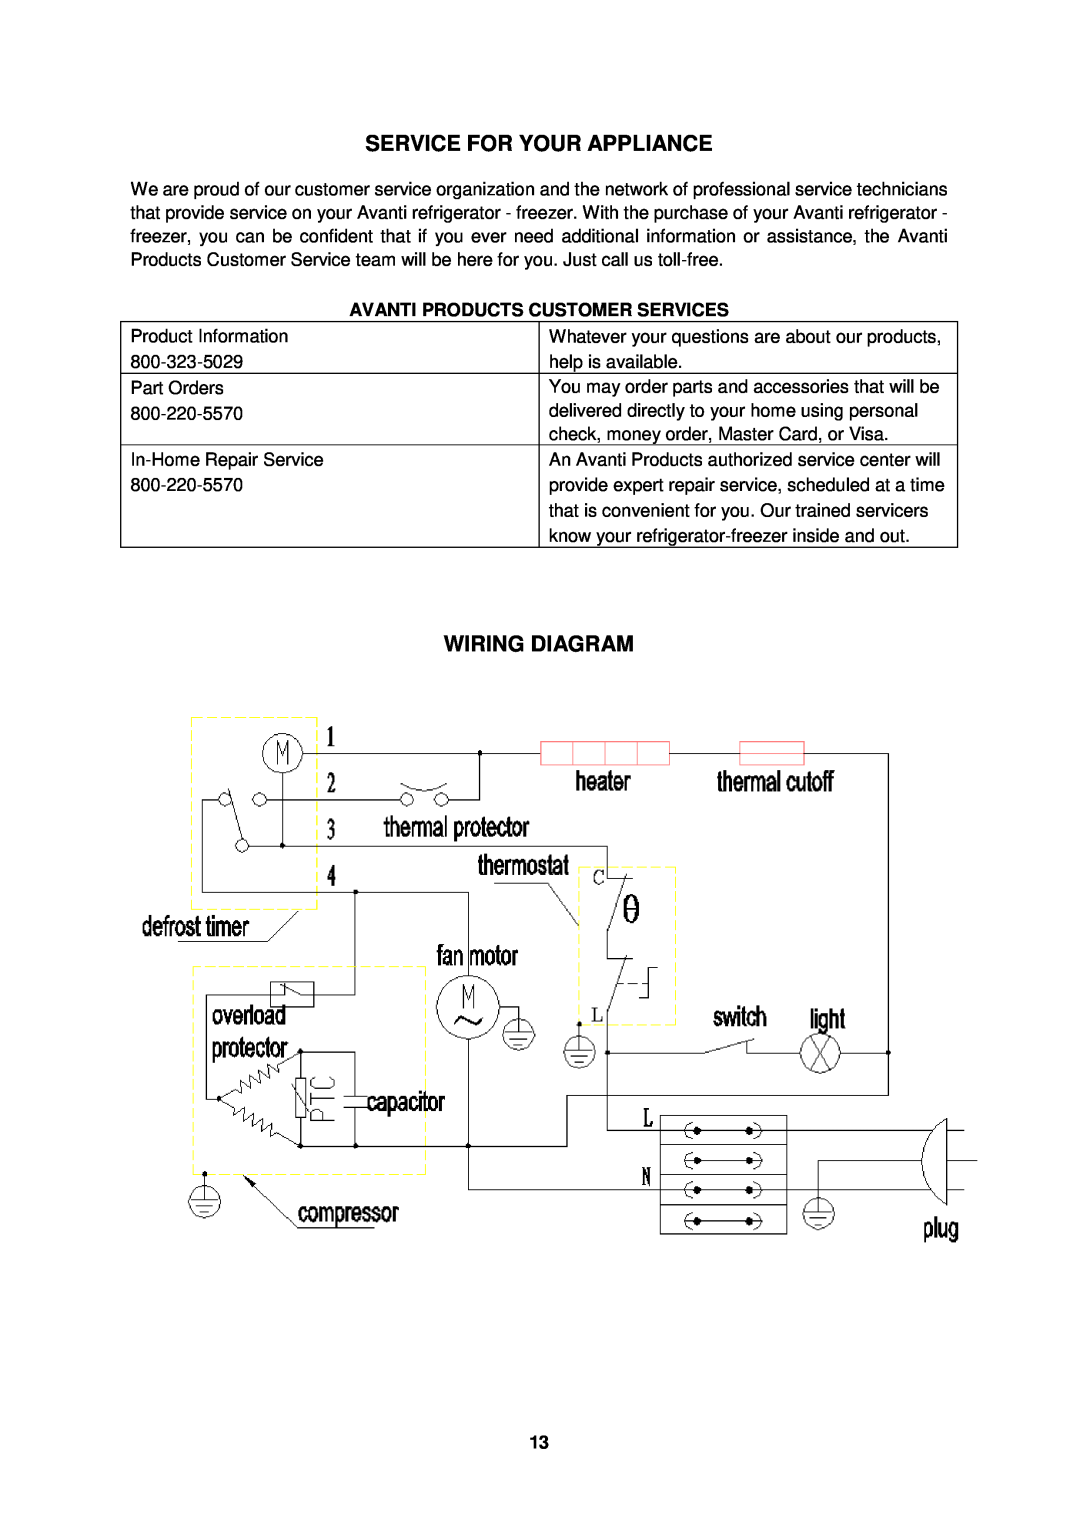 Avanti FF1155W, FF1156PS instruction manual Service For Your Appliance, Wiring Diagram, Avanti Products Customer Services 